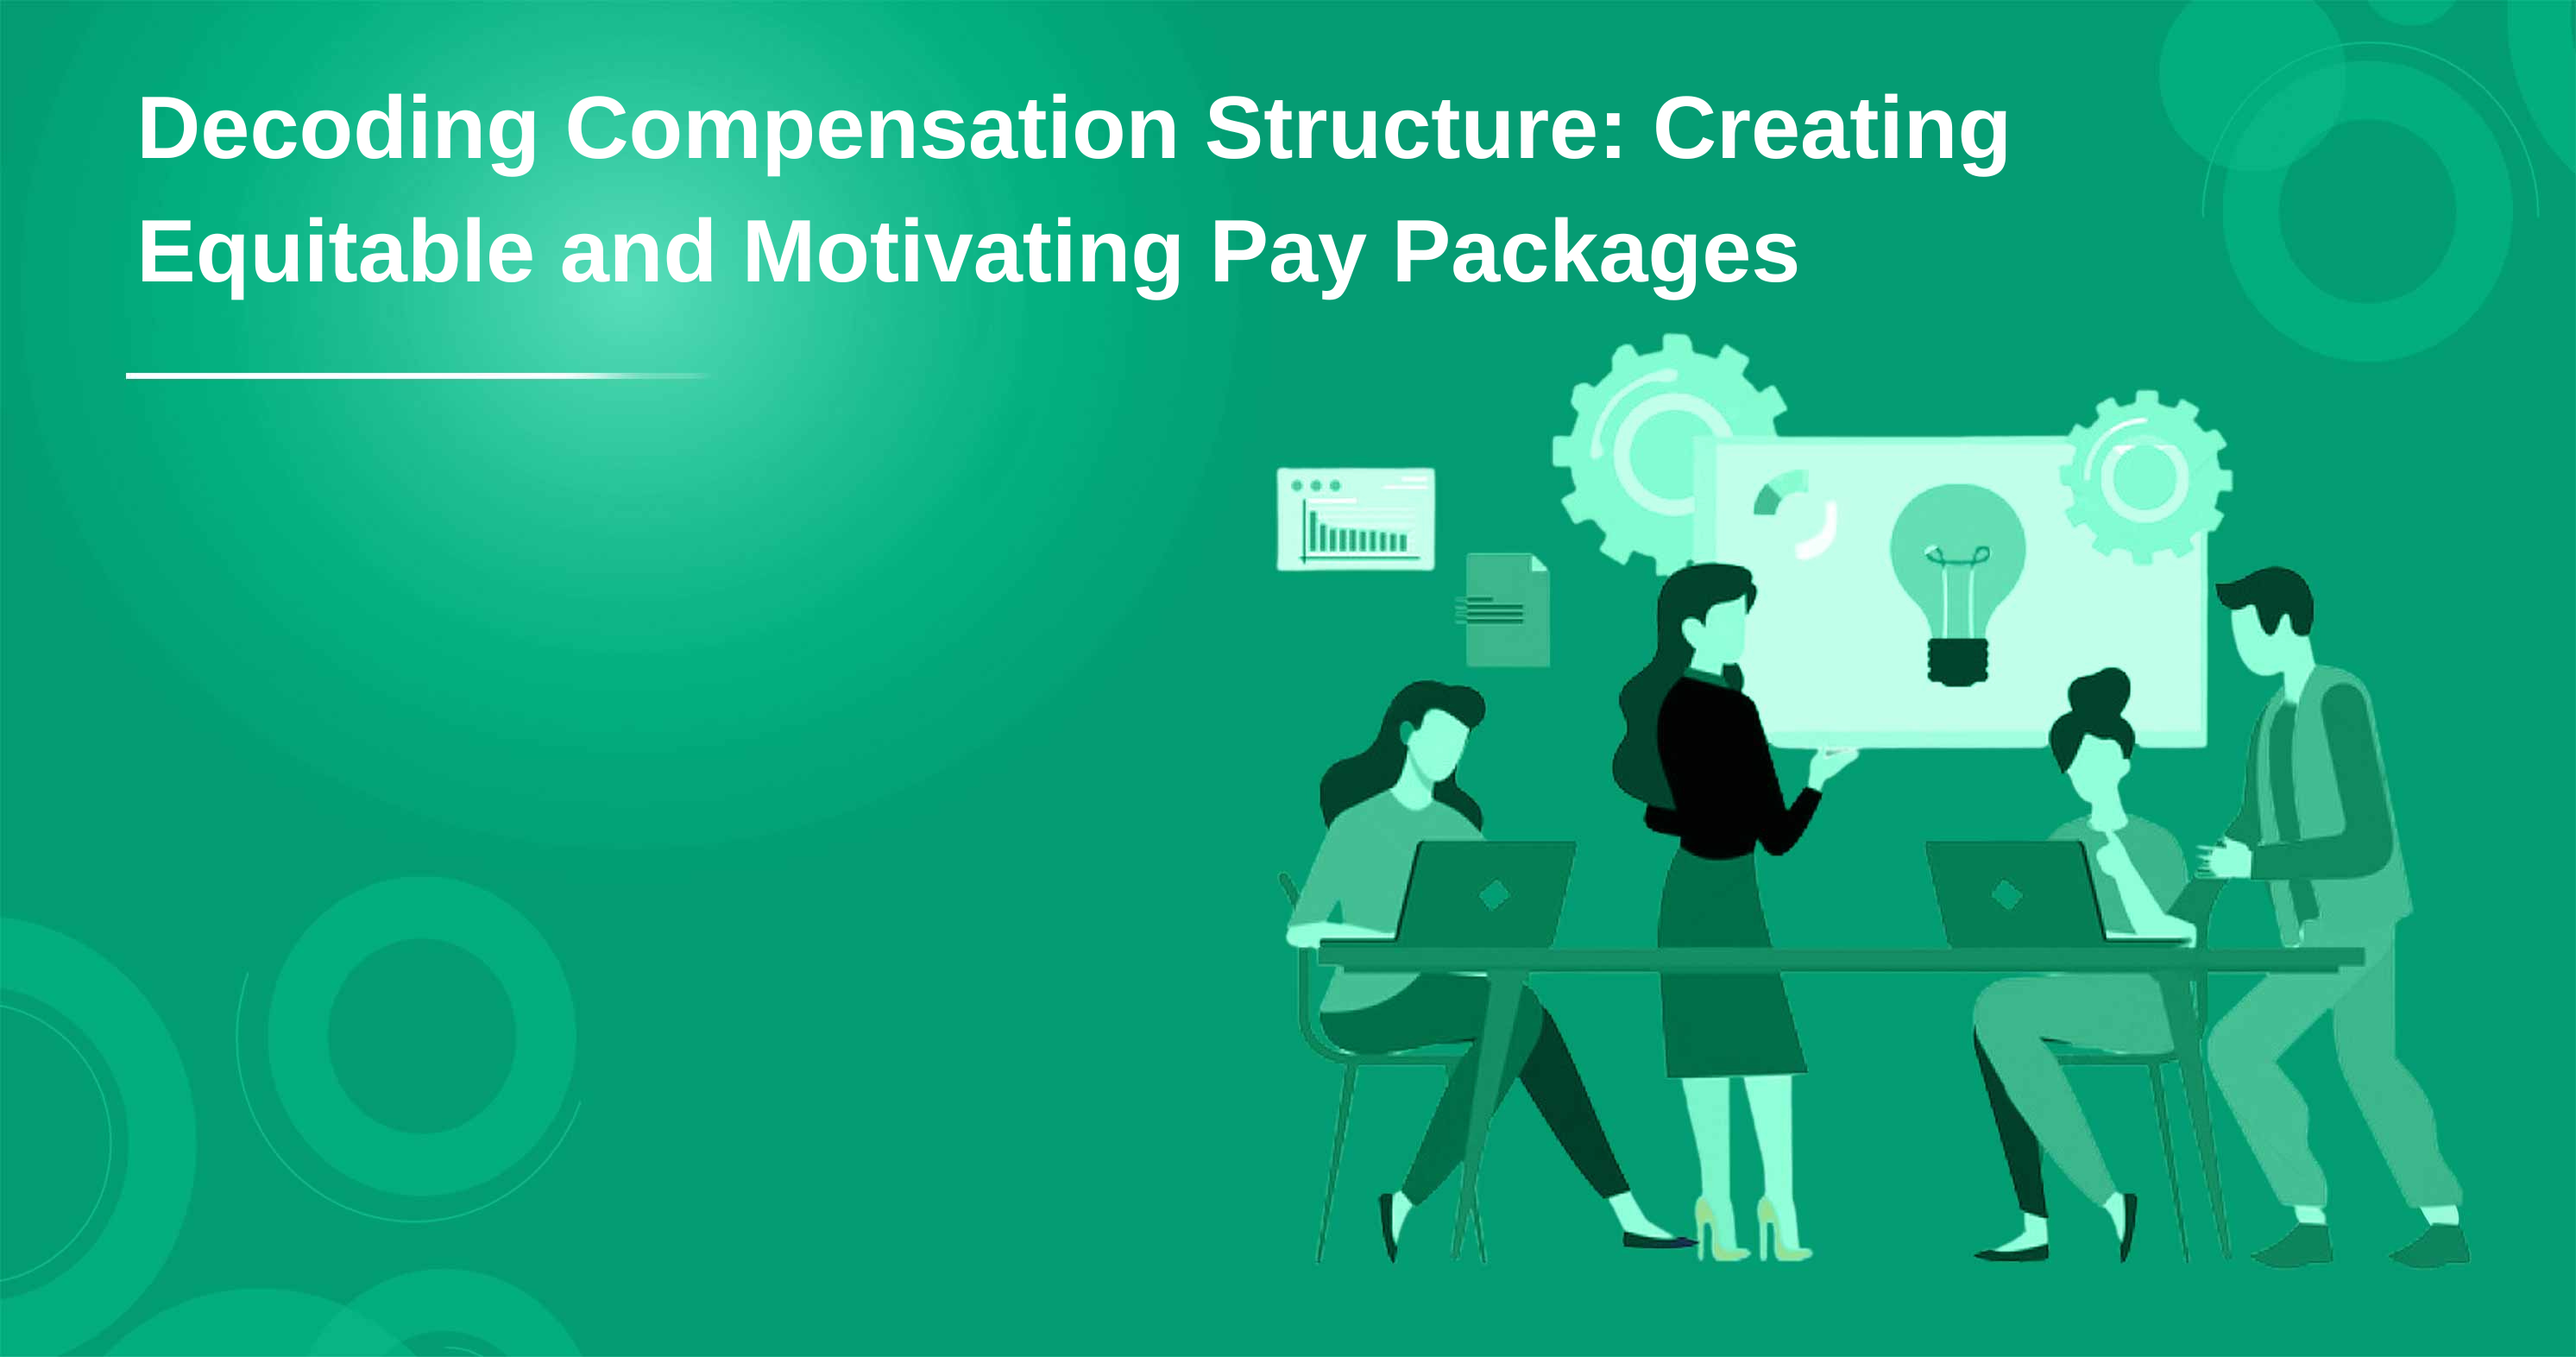 Decoding Compensation Structure: Creating Equitable and Motivating Pay Packages